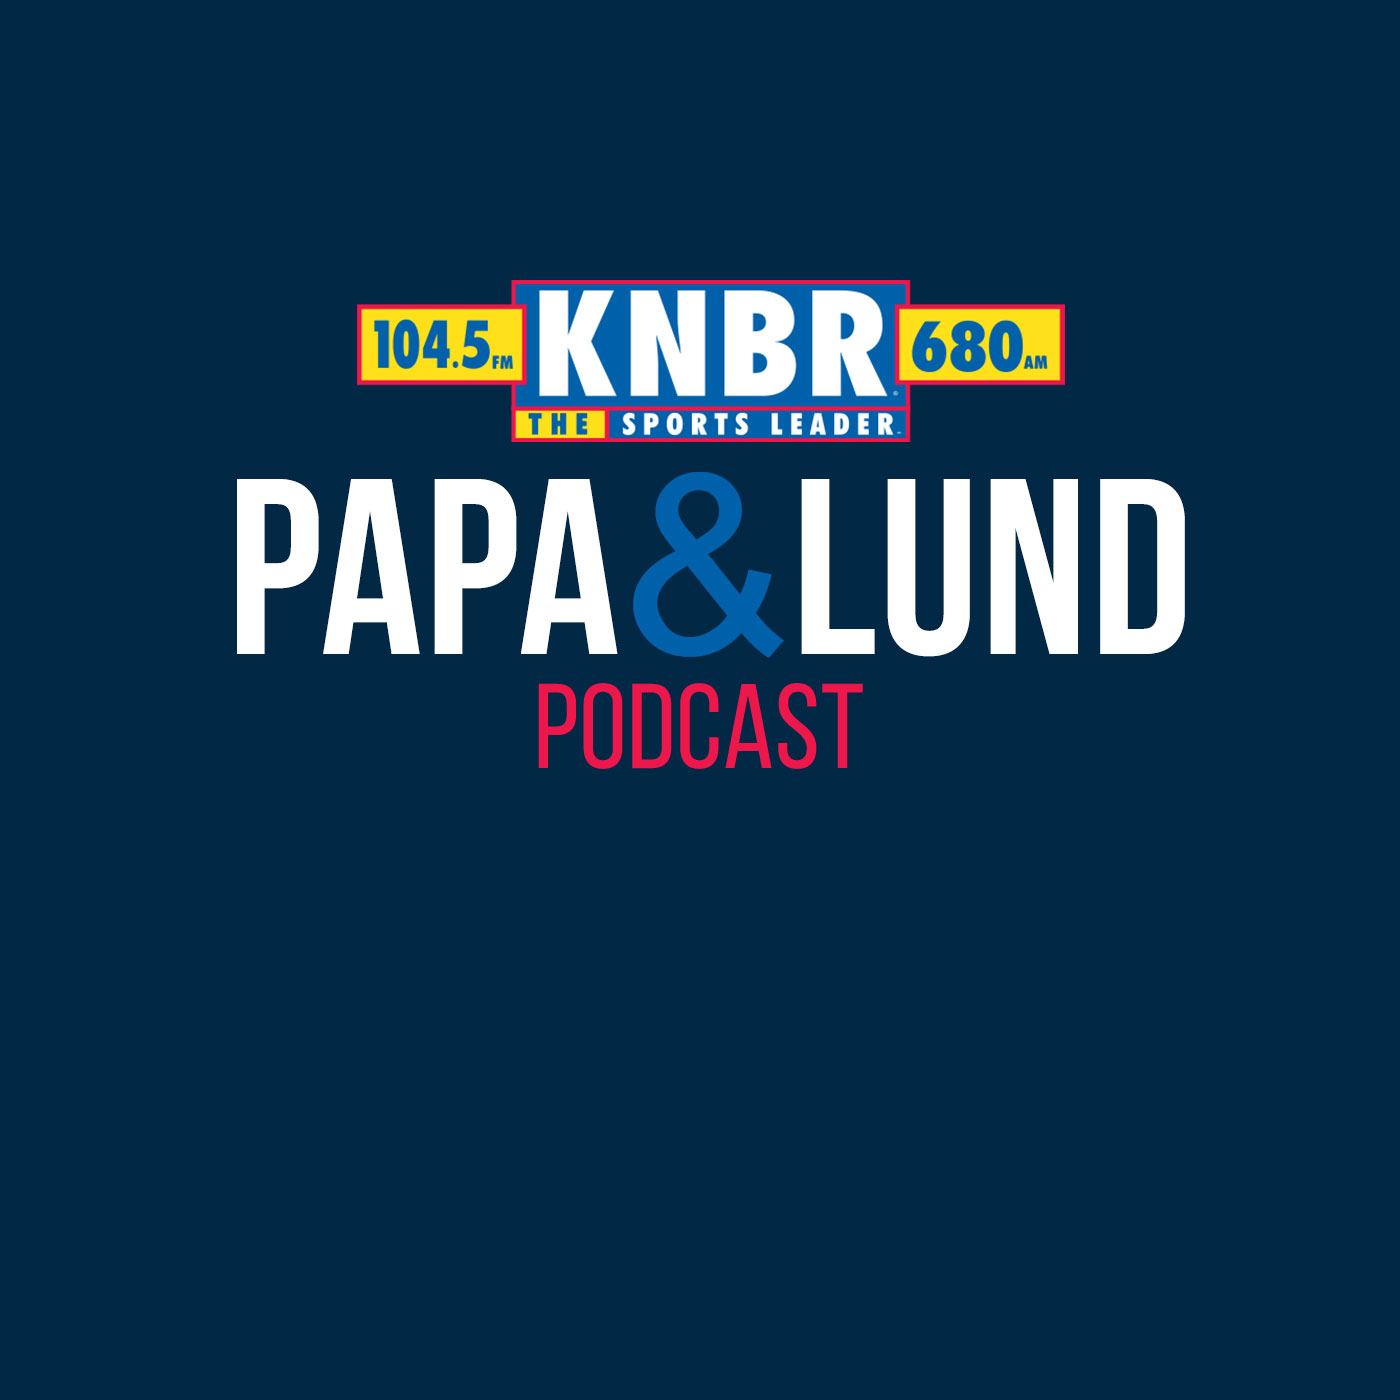 7-5 George Kontos joins Lund & Carlos Ramirez to discuss the All-Star possibilities for the Giants , the chances that Jordan Hick gets moved to the pen when Snell and Cobb return and more